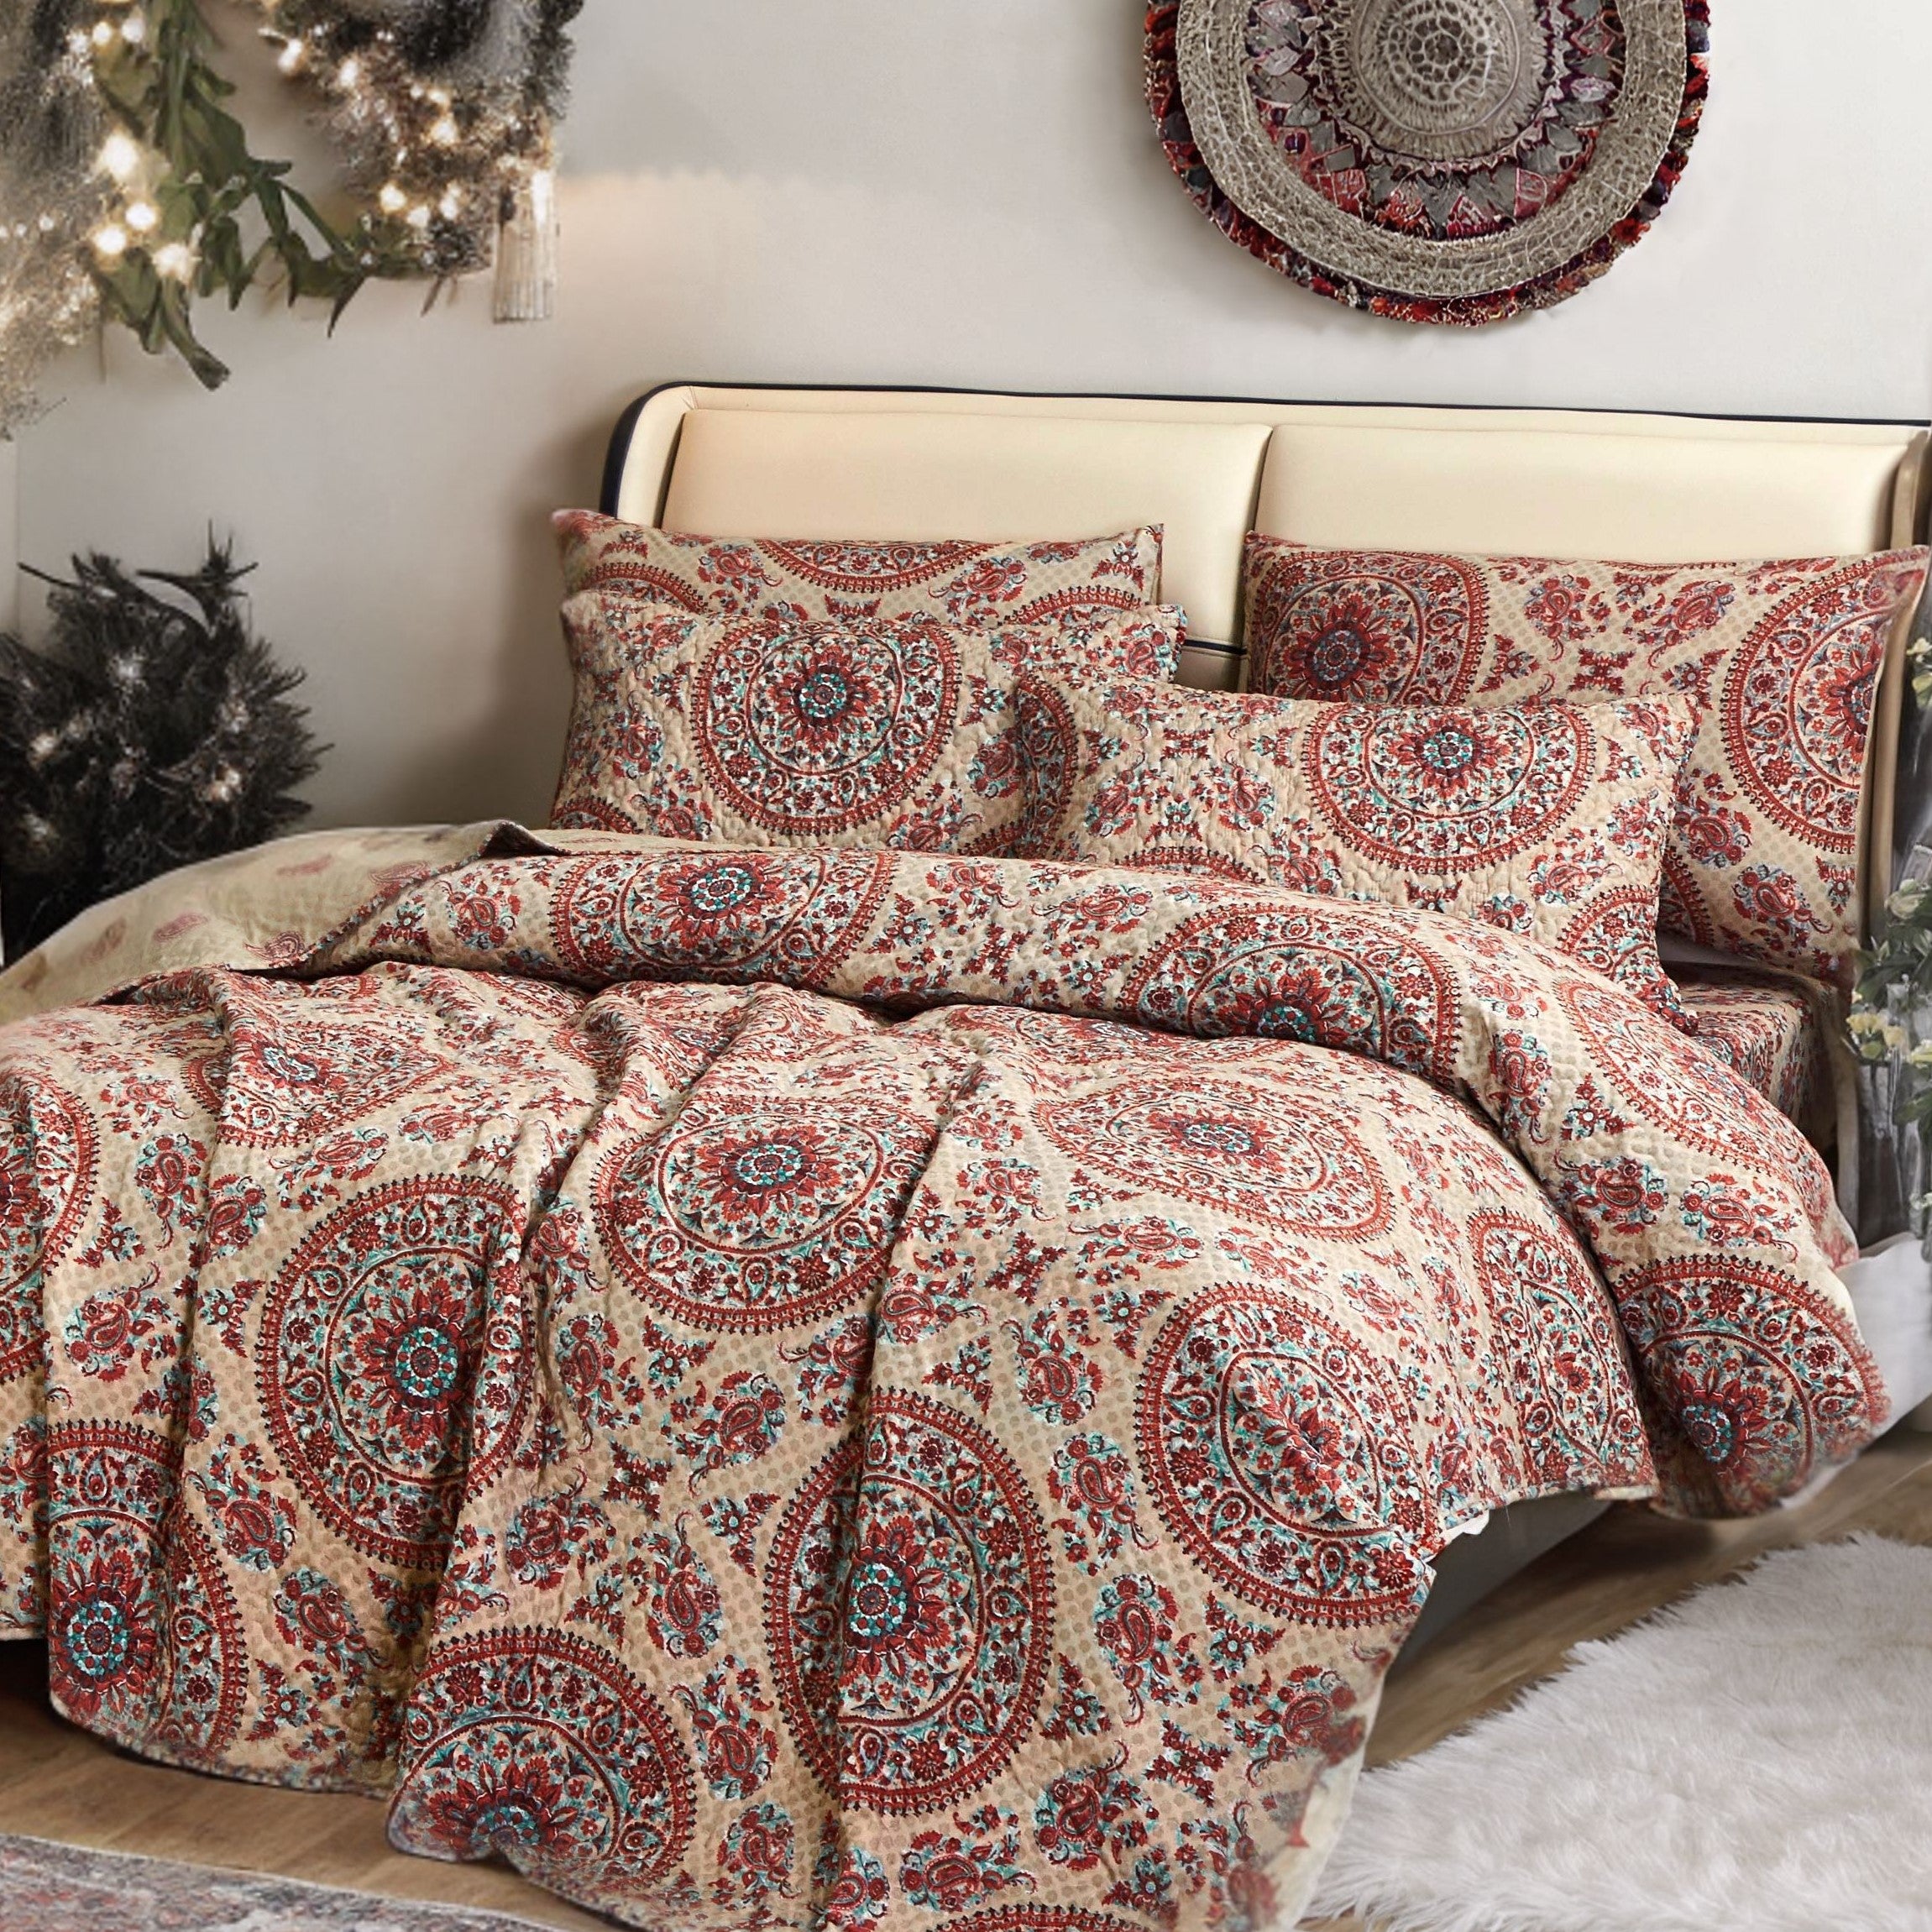 Tache Bohemian Medallion Paisley Print Quilt - A vibrant and intricately designed quilt featuring a medley of bohemian-inspired patterns, including paisley motifs and medallion accents. The quilt showcases a rich color palette and detailed craftsmanship, adding a touch of eclectic elegance to any bedroom setting.